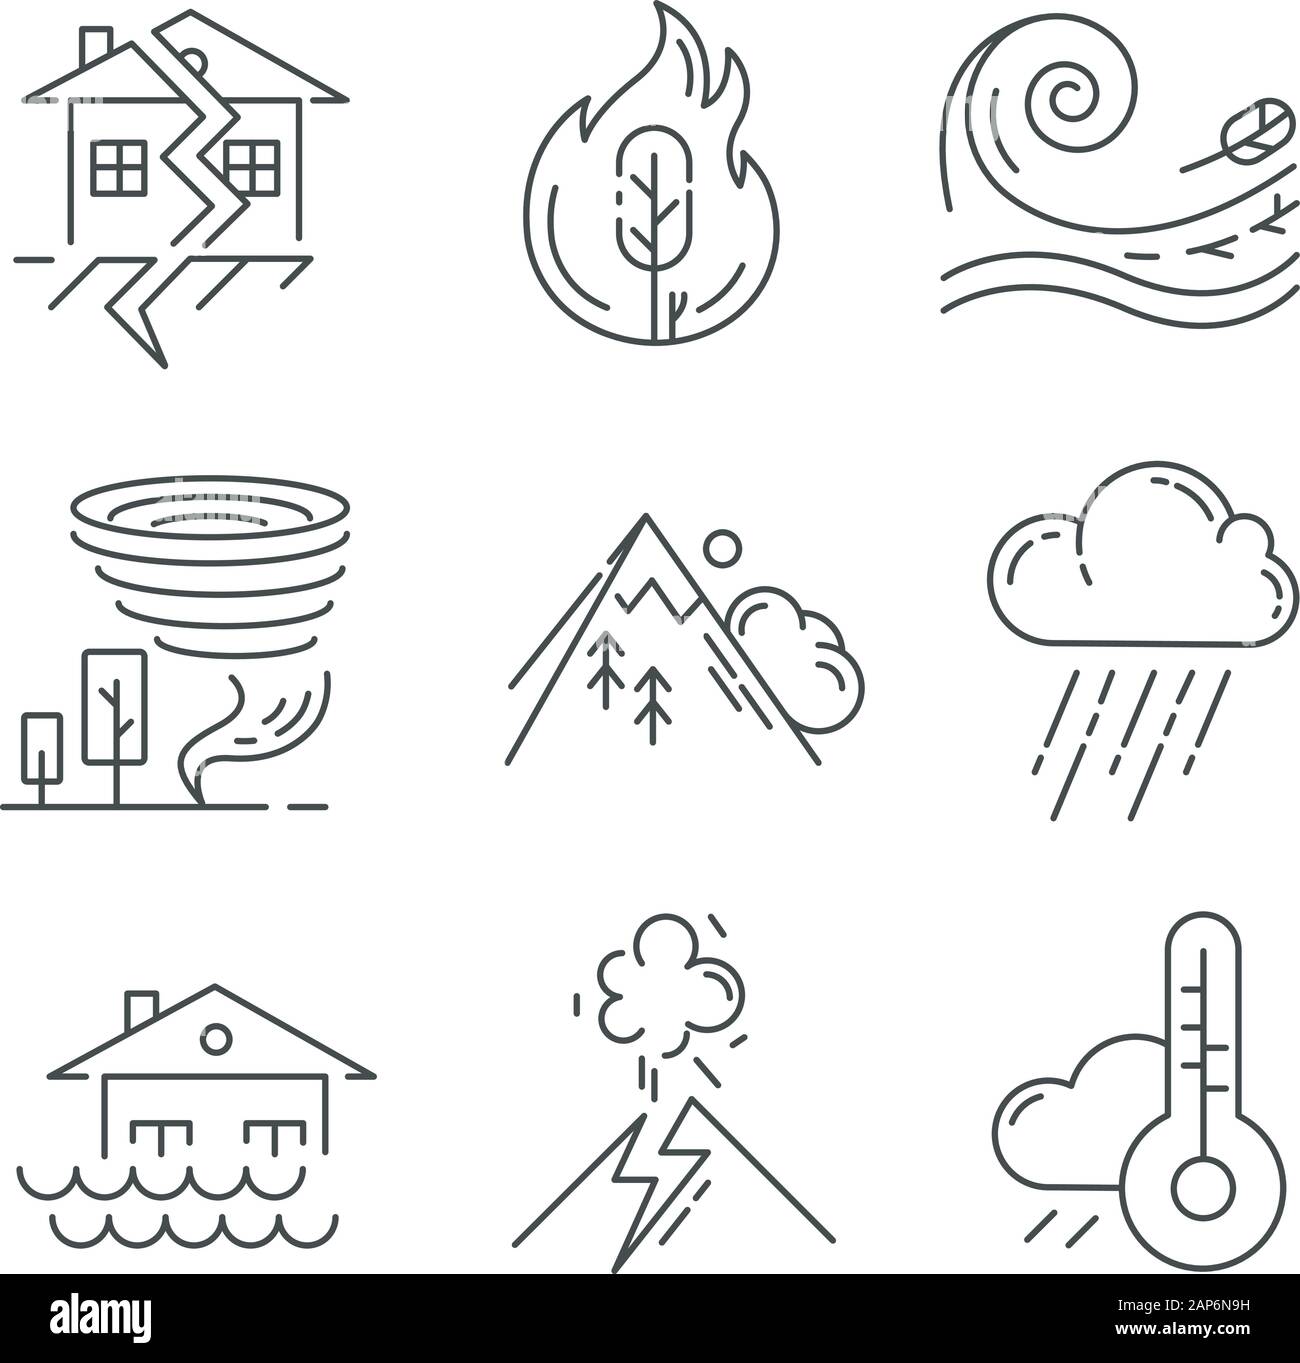 Natural disaster linear icons set. Wildfire, earthquake, tornado, avalanche. Geological and atmospheric catastrophes. Thin line contour symbols. Isola Stock Vector